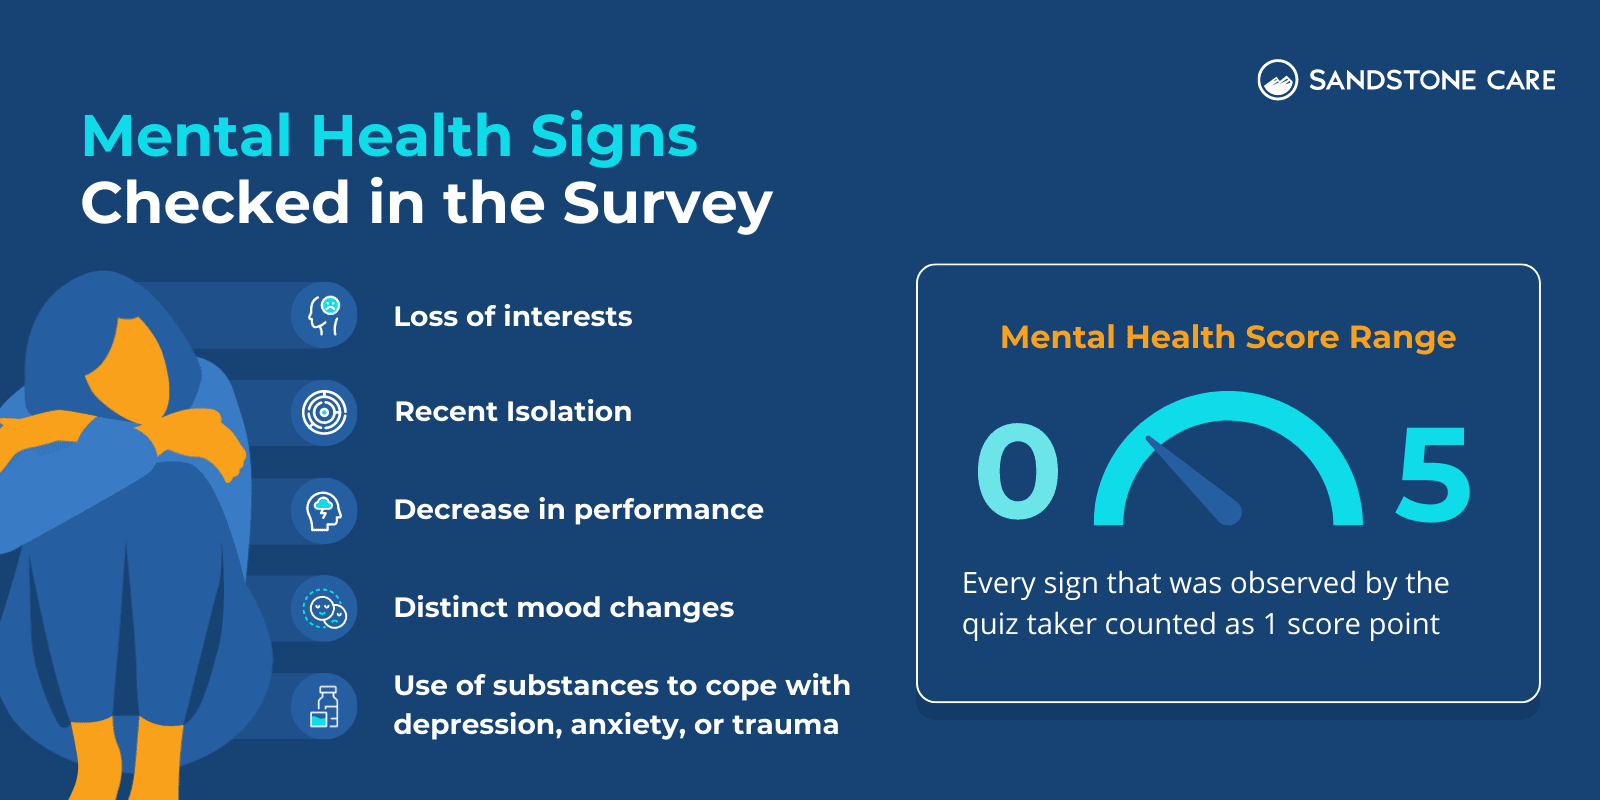 How the score was calculated for mental health